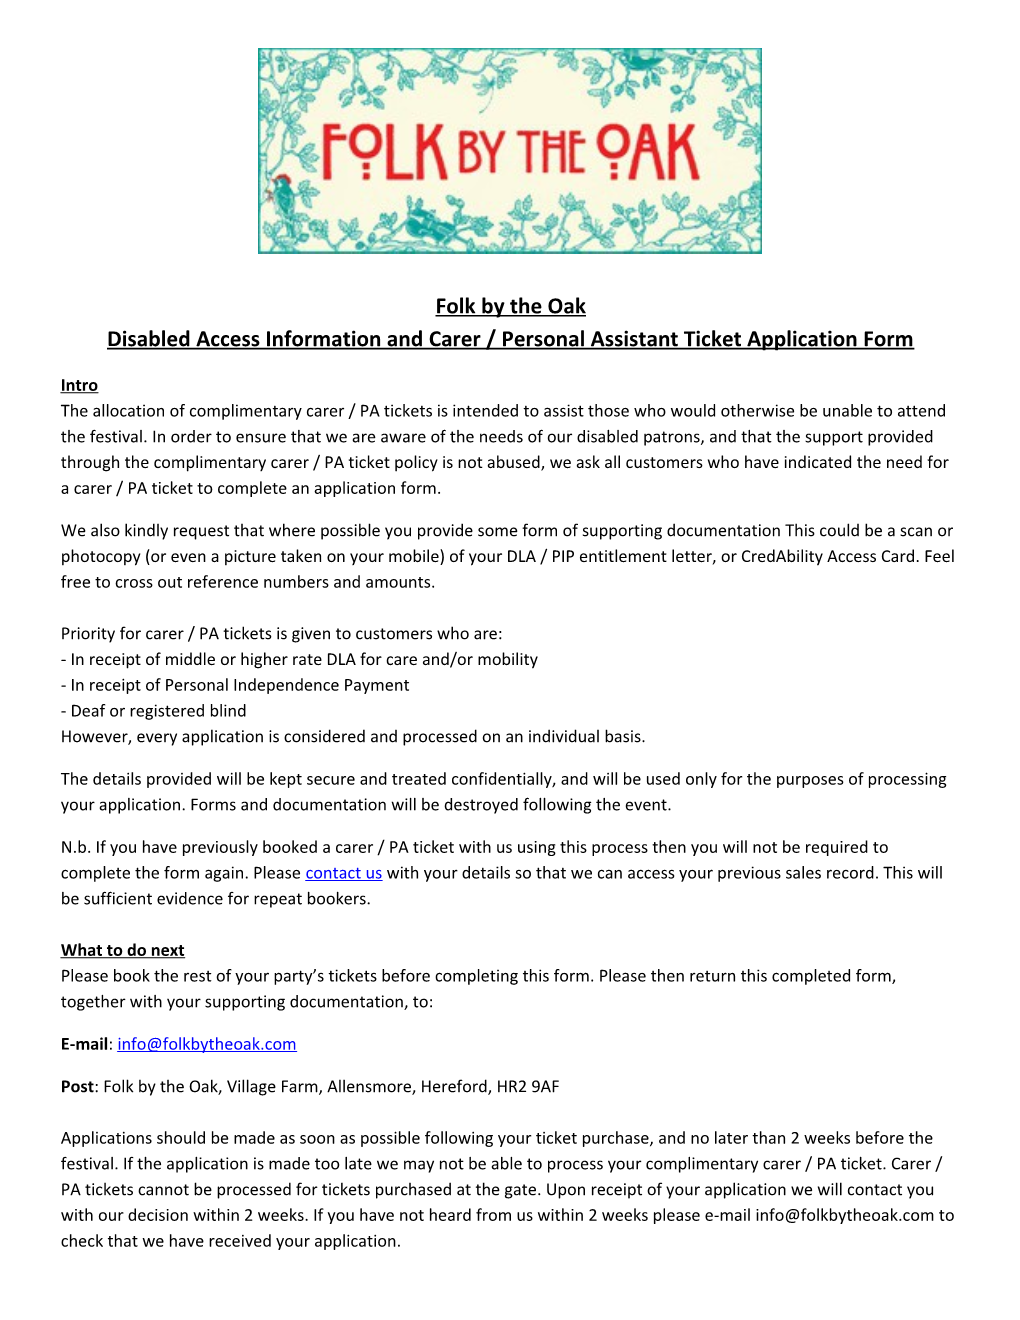 Folk by the Oak Disabled Access Information and Carer / Personal Assistant Ticket Application